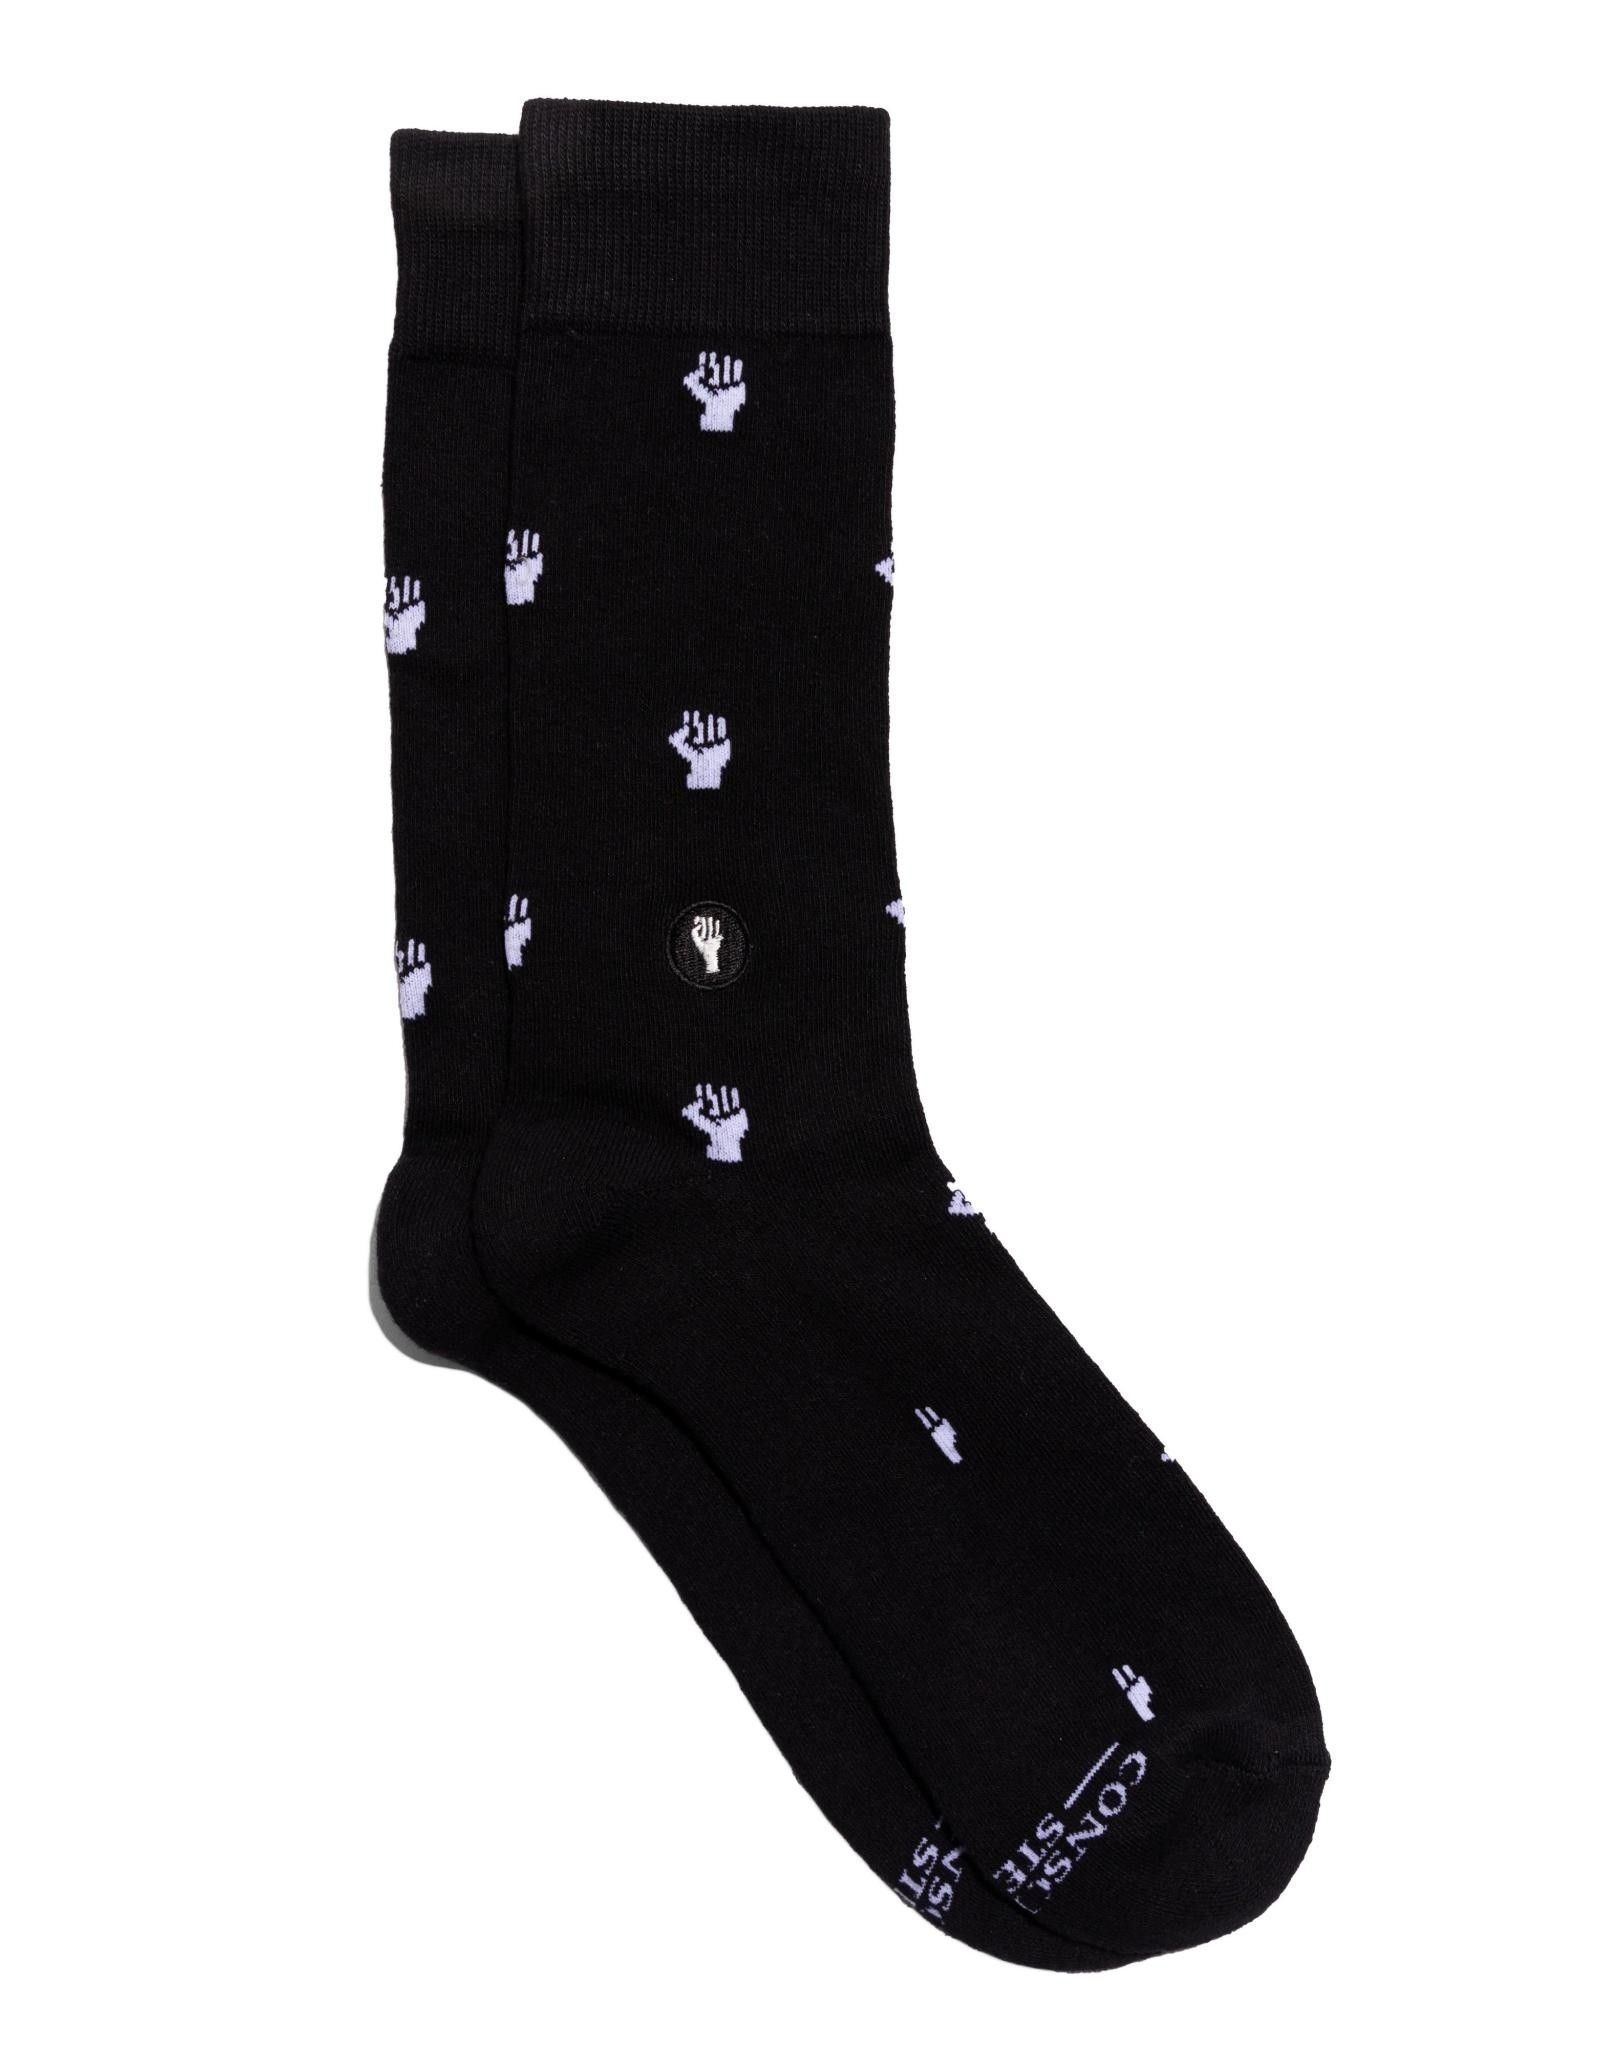 Conscious Step Socks that Fight for Equality (Black)